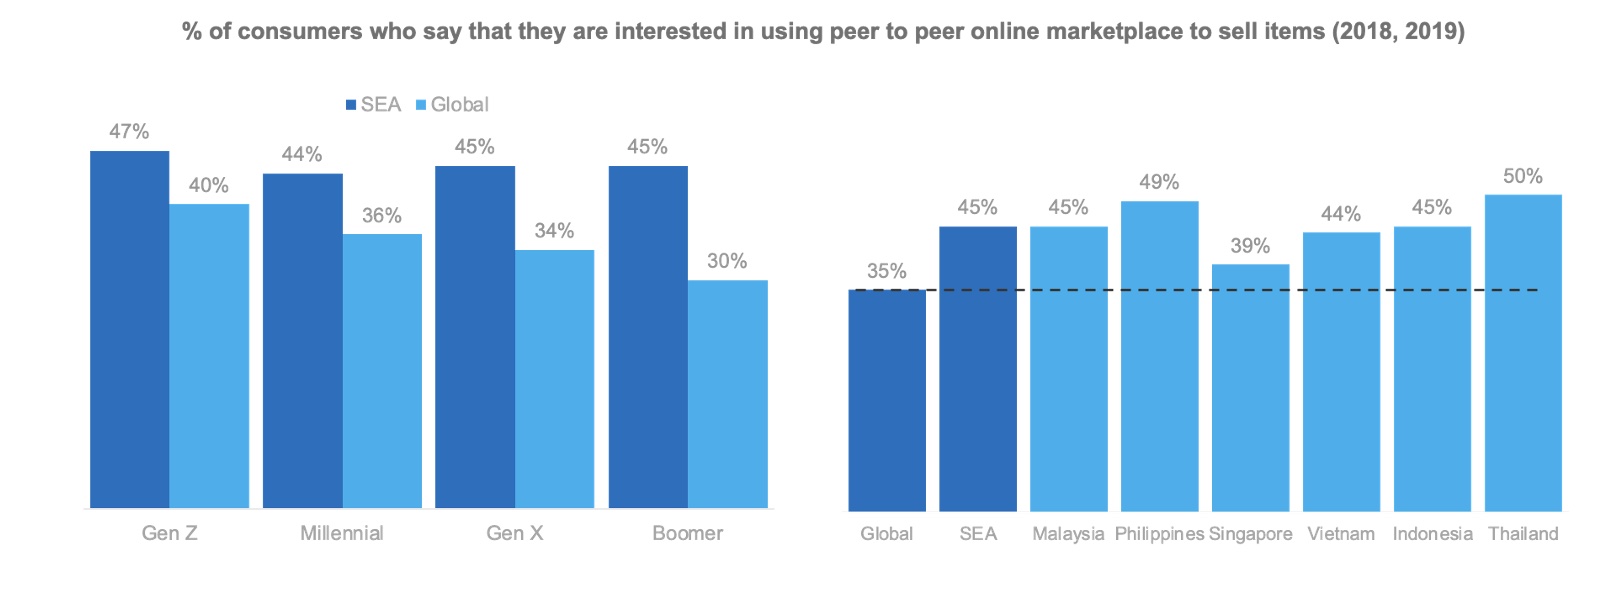 People in Southeast Asia have a greater preference for online P2P marketplaces than in other regions